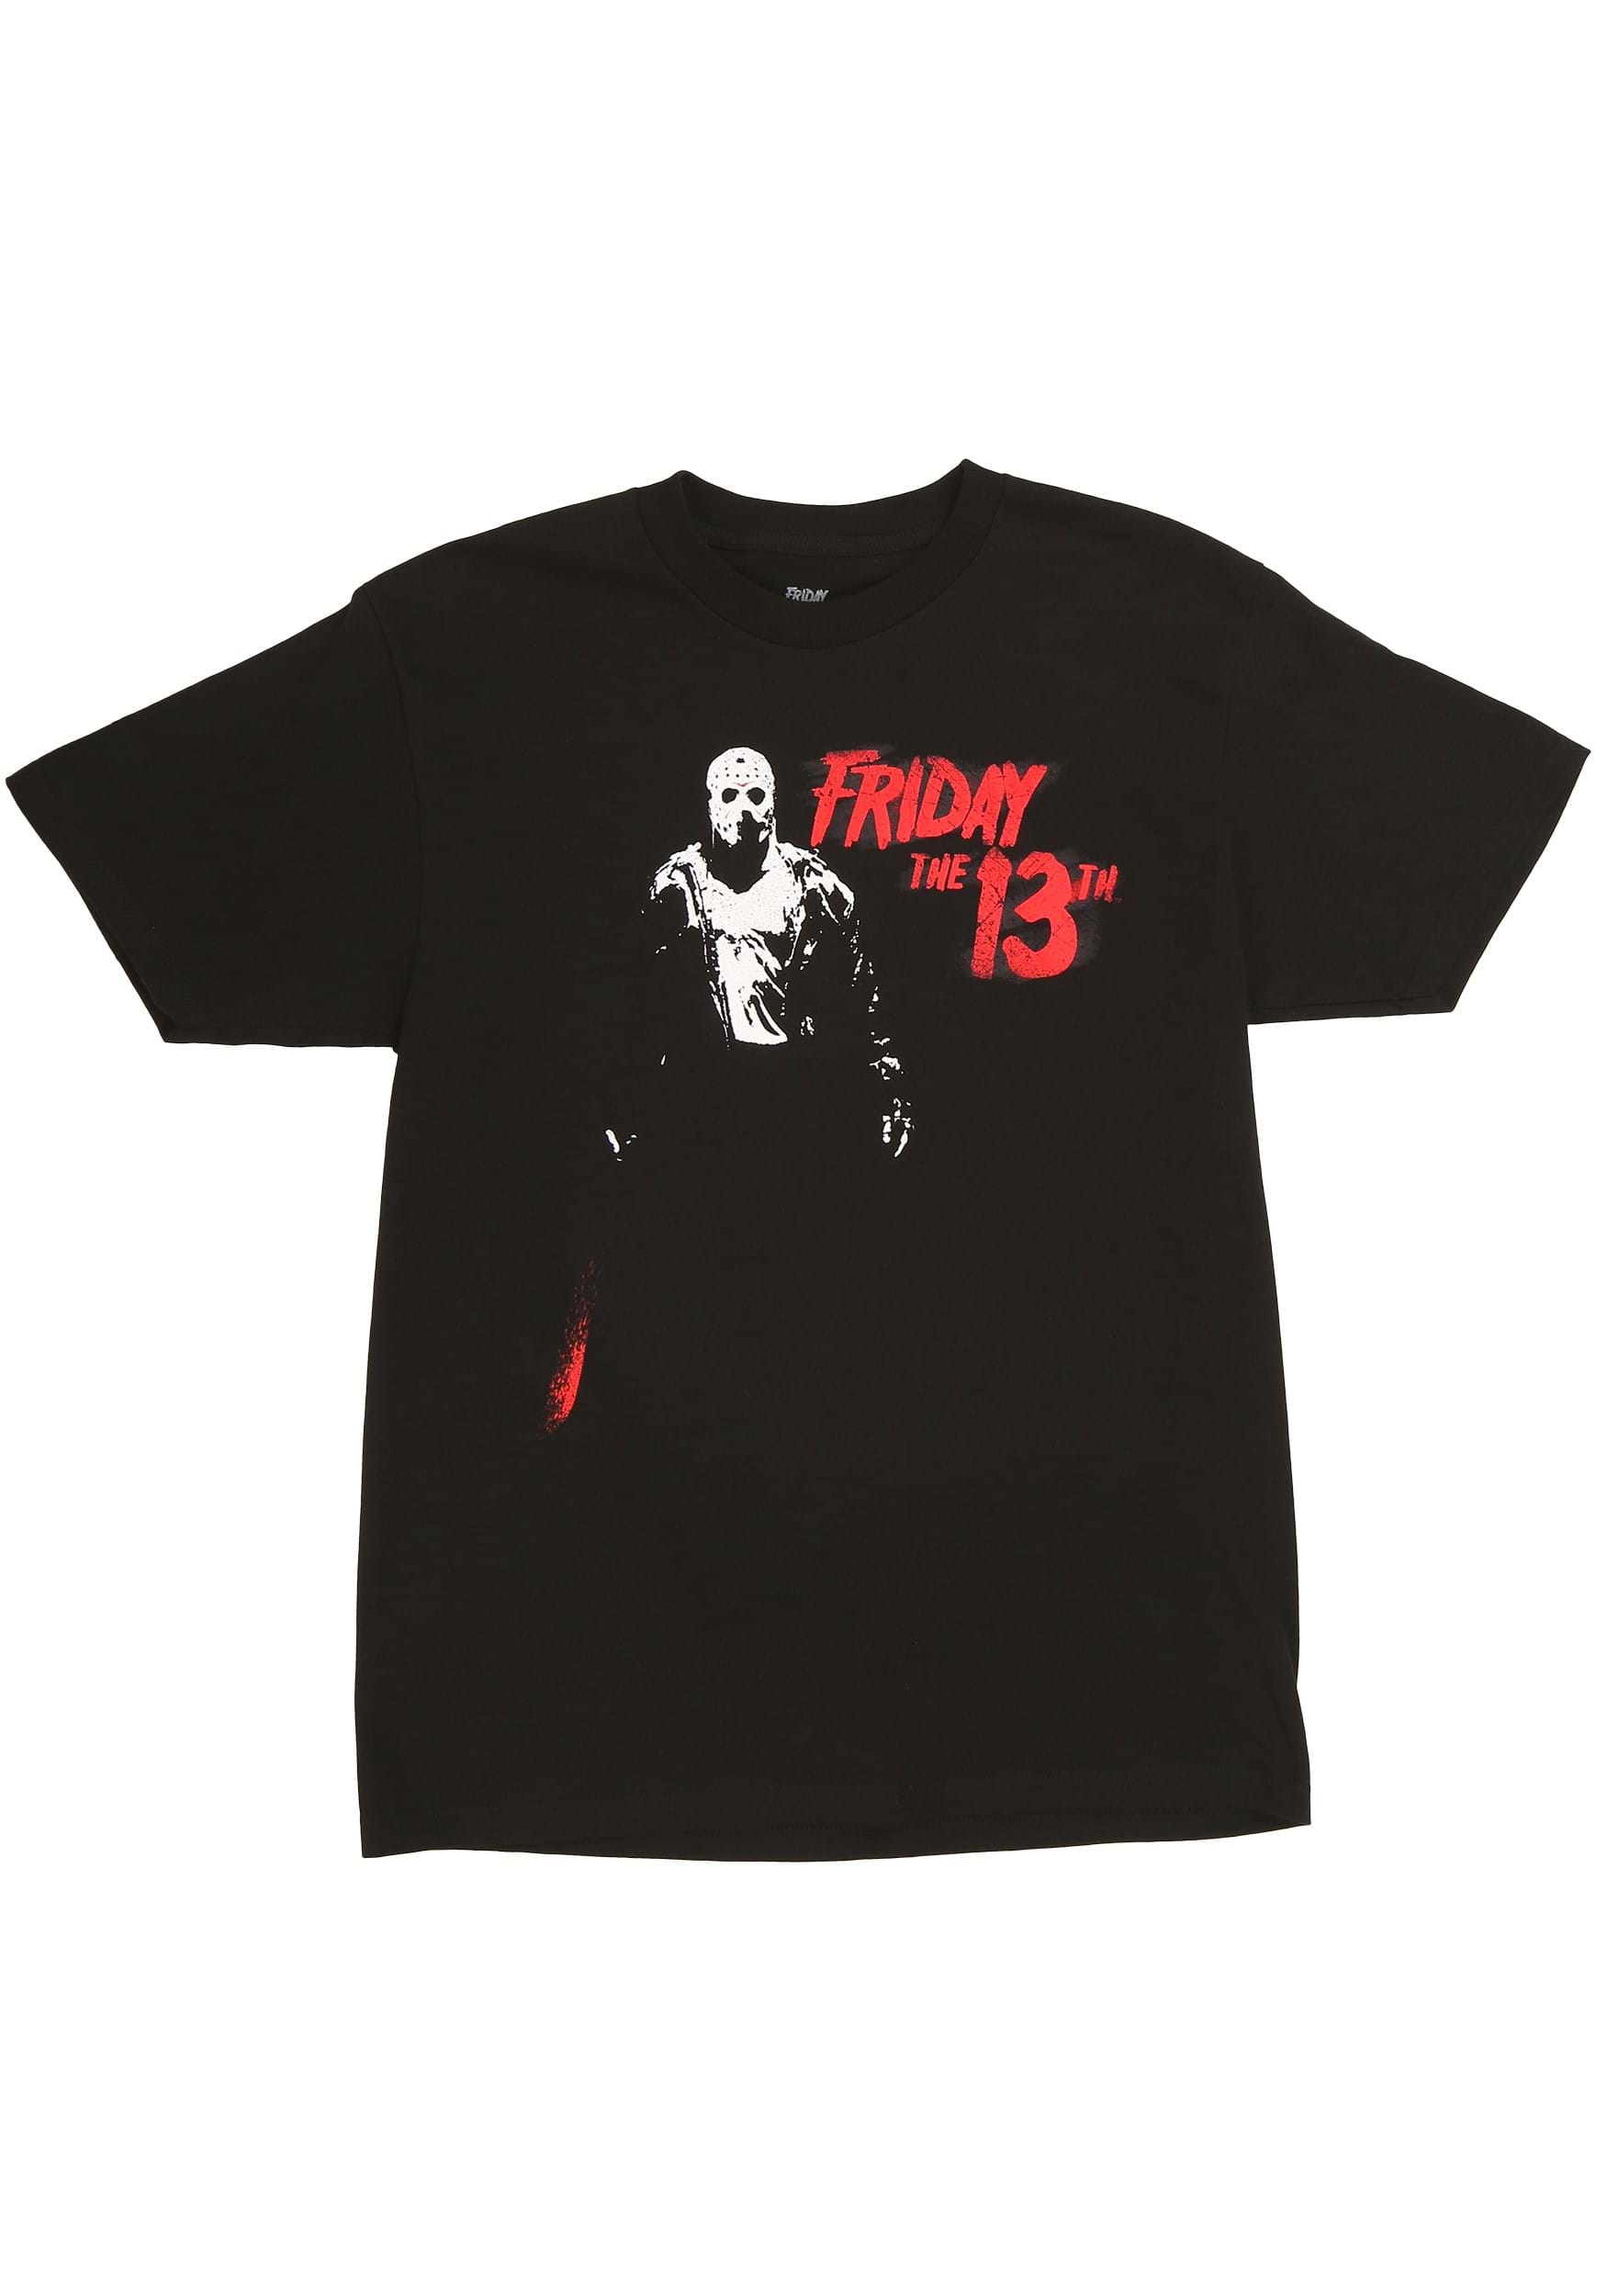 Jason Vorhees Friday The 13th Adult T-Shirt